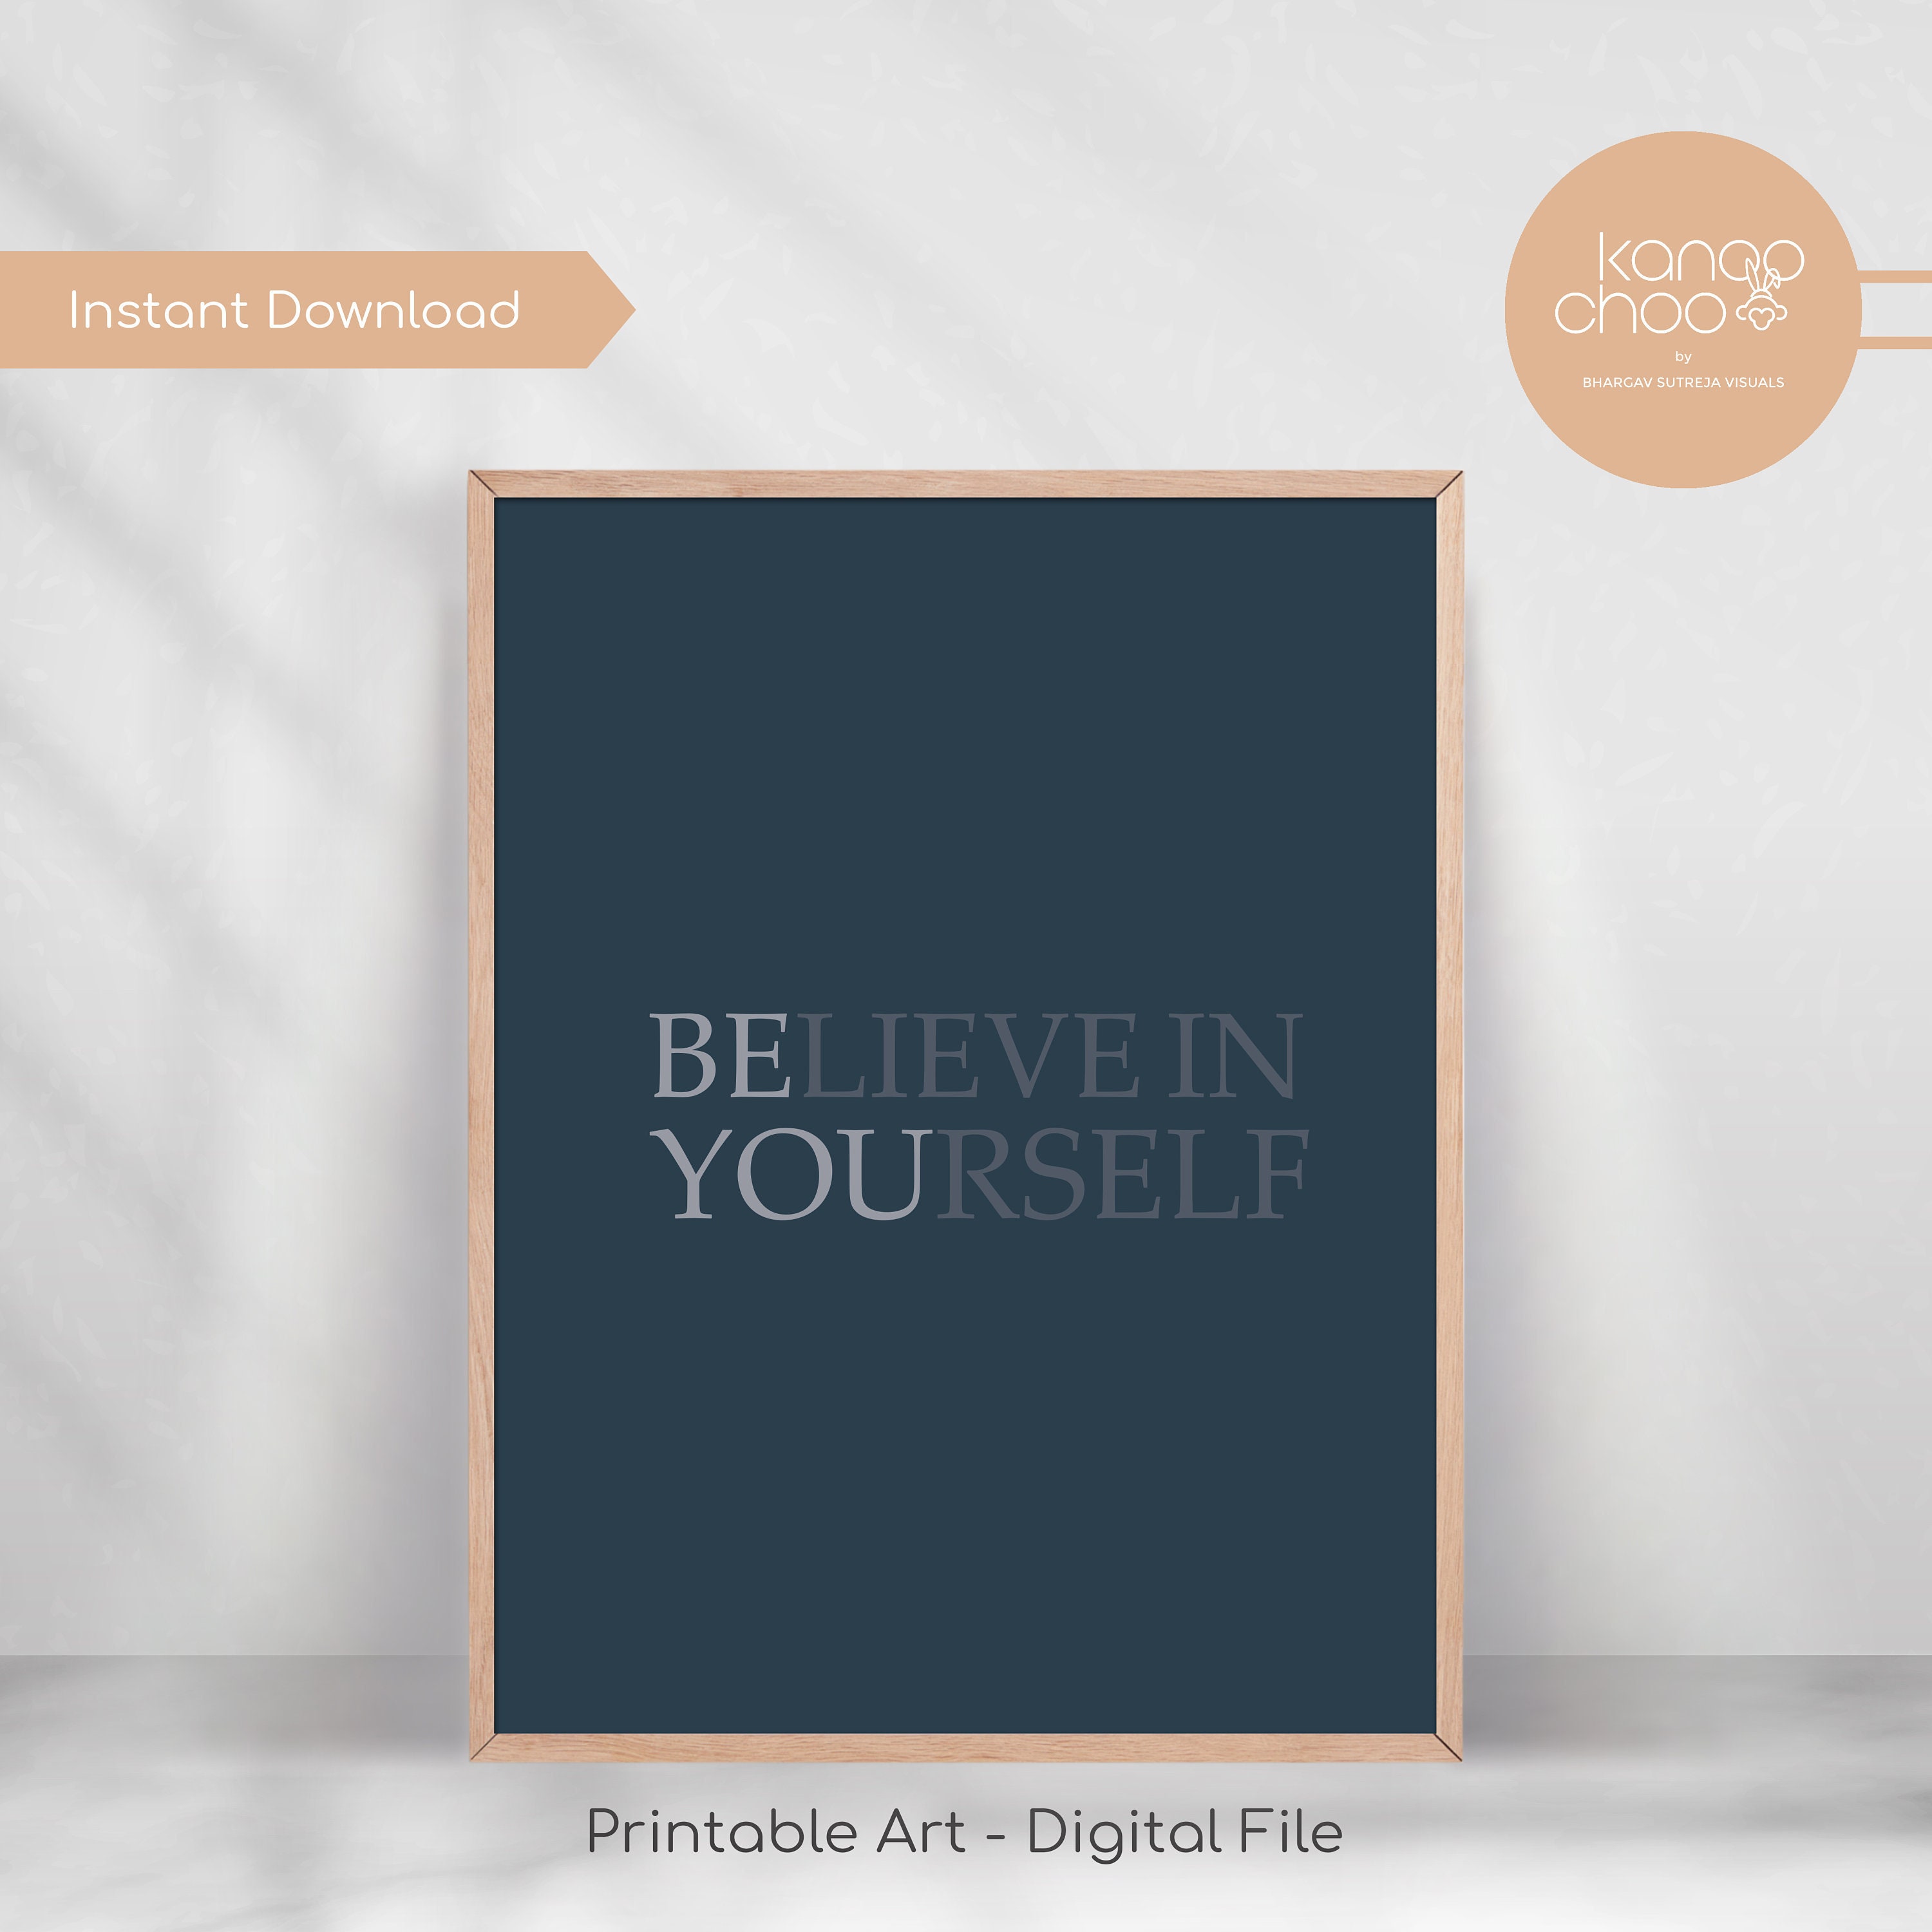 Sayings Inspirational Quotes in Printable Home, Decor, Wall Art, Yourself Etsy Print, Print, Art, Typography - Minimalist Modern Believe Poster,